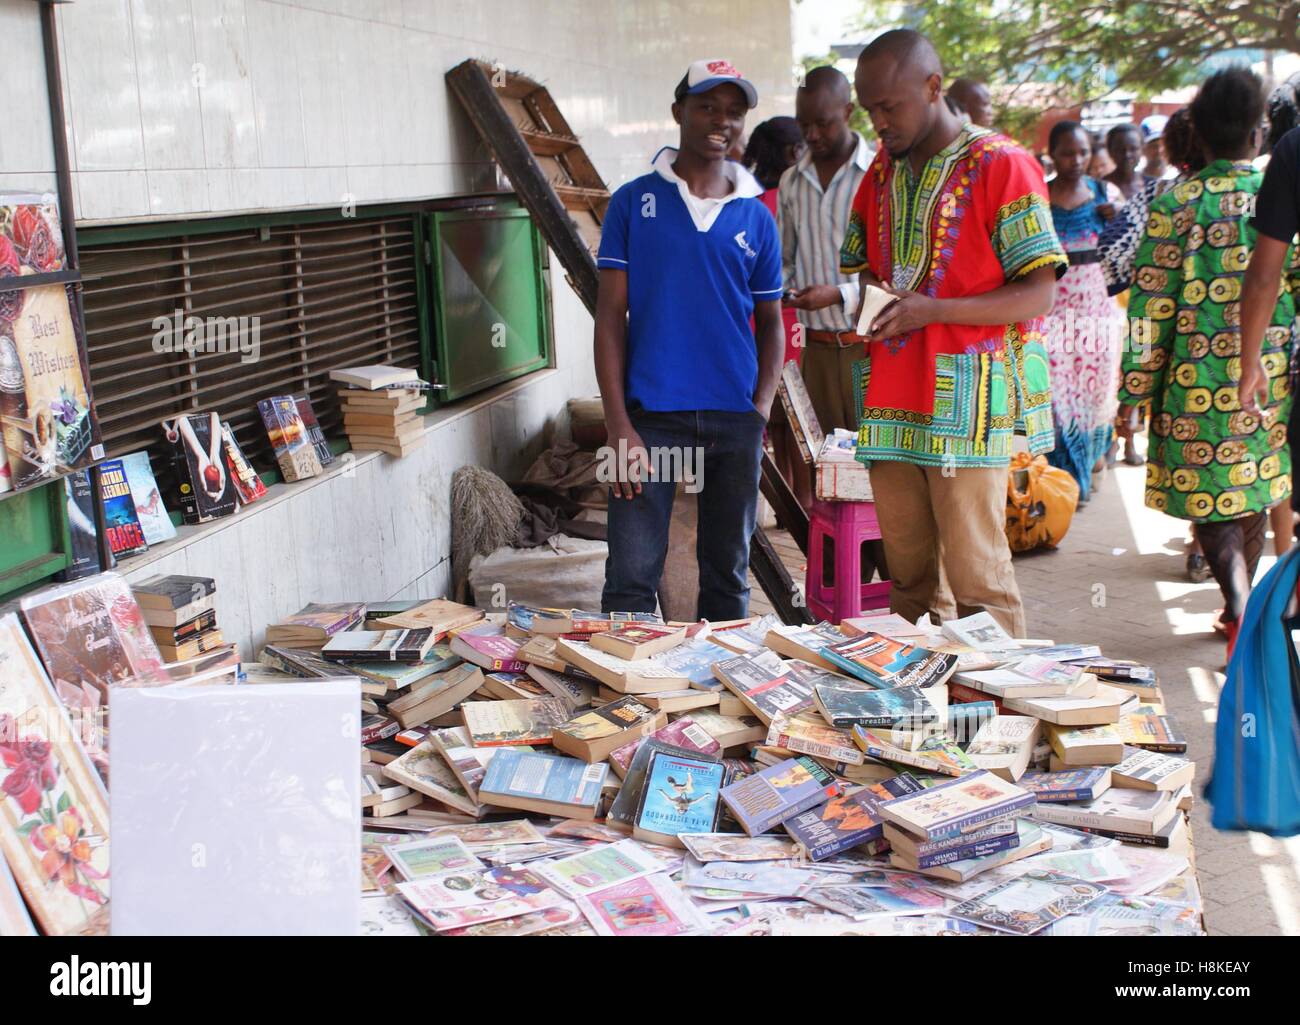 Francis Mbinda (L), 22-years-old, sells second hand books at the Tom Mboya Street in the Kenyan capital Nairobi, 23 October 2016. Here he is speaking to a client. Photo: Anja Bengelstorff/dpa Stock Photo